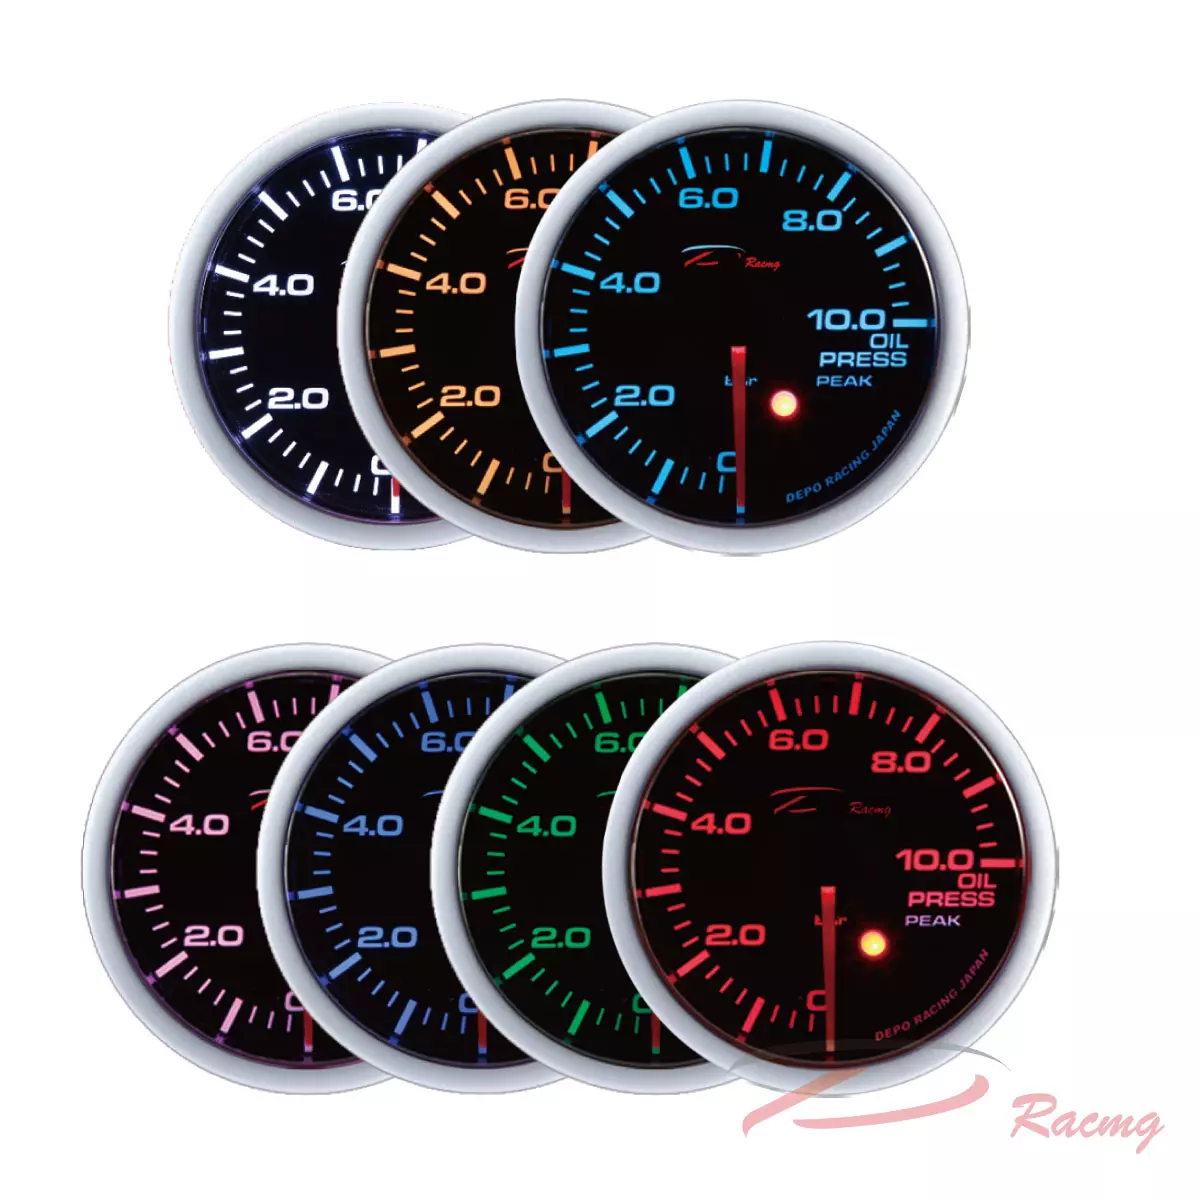 Dracing, Depo racing, AutoMeter, AutoMeter, oil pressure gauges, oil press gauges, best oil pressure gauges, performance oil pressure gauges, accurate oil pressure gauges, durable oil pressure gauges, professional oil pressure gauges, racing oil pressure gauges, car oil pressure gauges, truck oil pressure gauges, suv oil pressure gauges, motorcycle oil pressure gauges, 2-1/16" oil pressure gauges, 2-5/8" oil pressure gauges, 0-80 psi oil pressure gauges, 0-100 psi oil pressure gauges, 5-100 psi oil pressure gauges, 0-120 psi oil pressure gauges, 0-150 psi oil pressure gauges, 0-7BARS oil pressure gauges, quad gauges, dual gauges